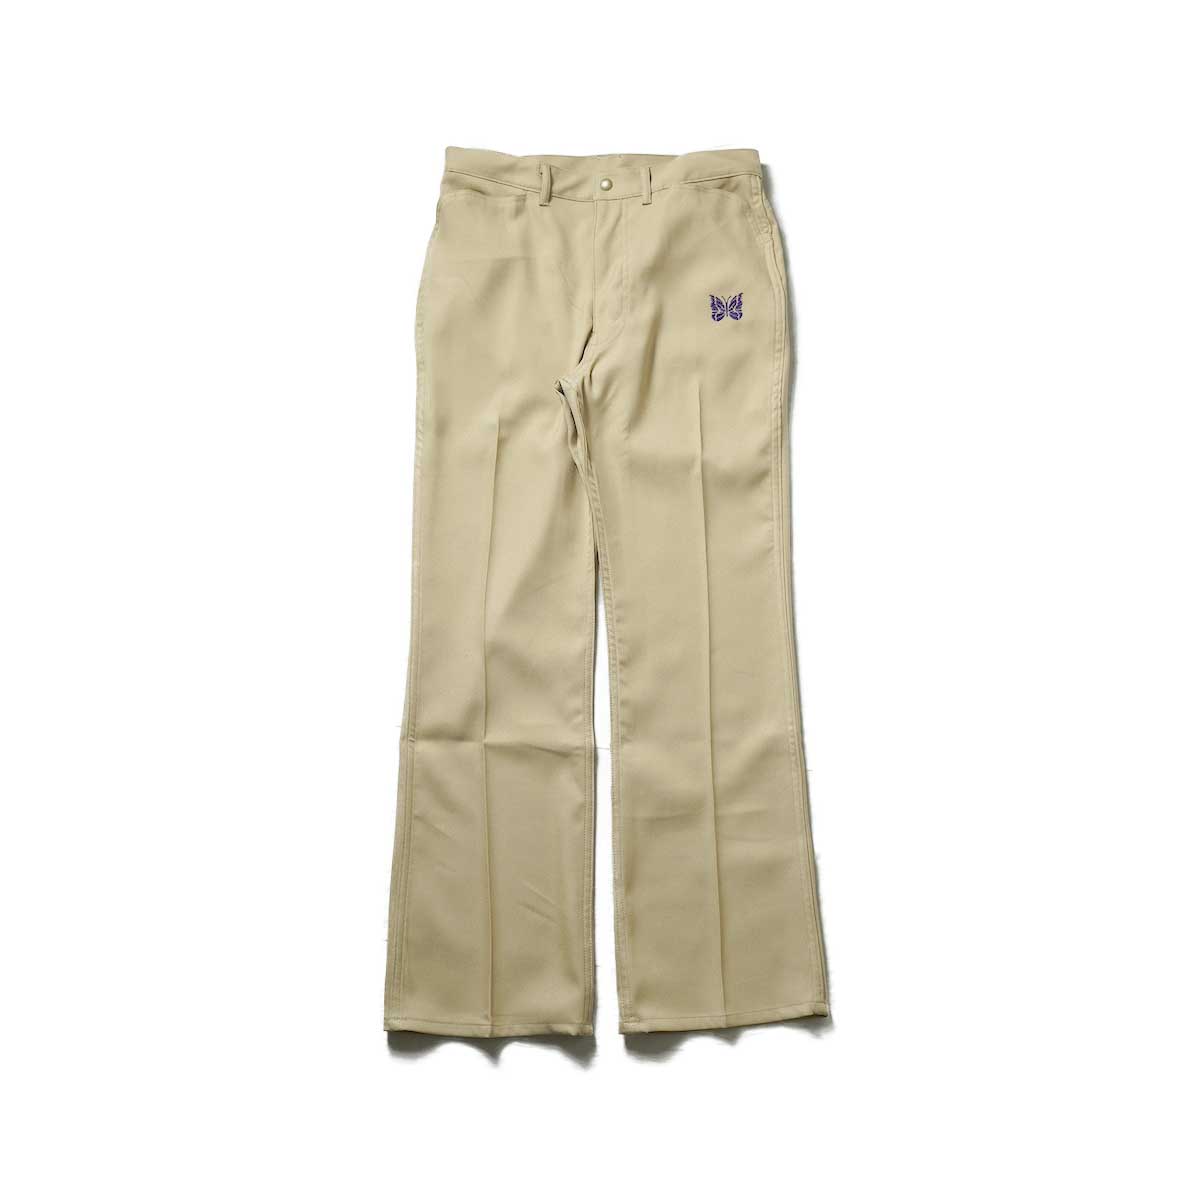 Needles / Boot-cut Jean - Poly Twill (Beige)正面